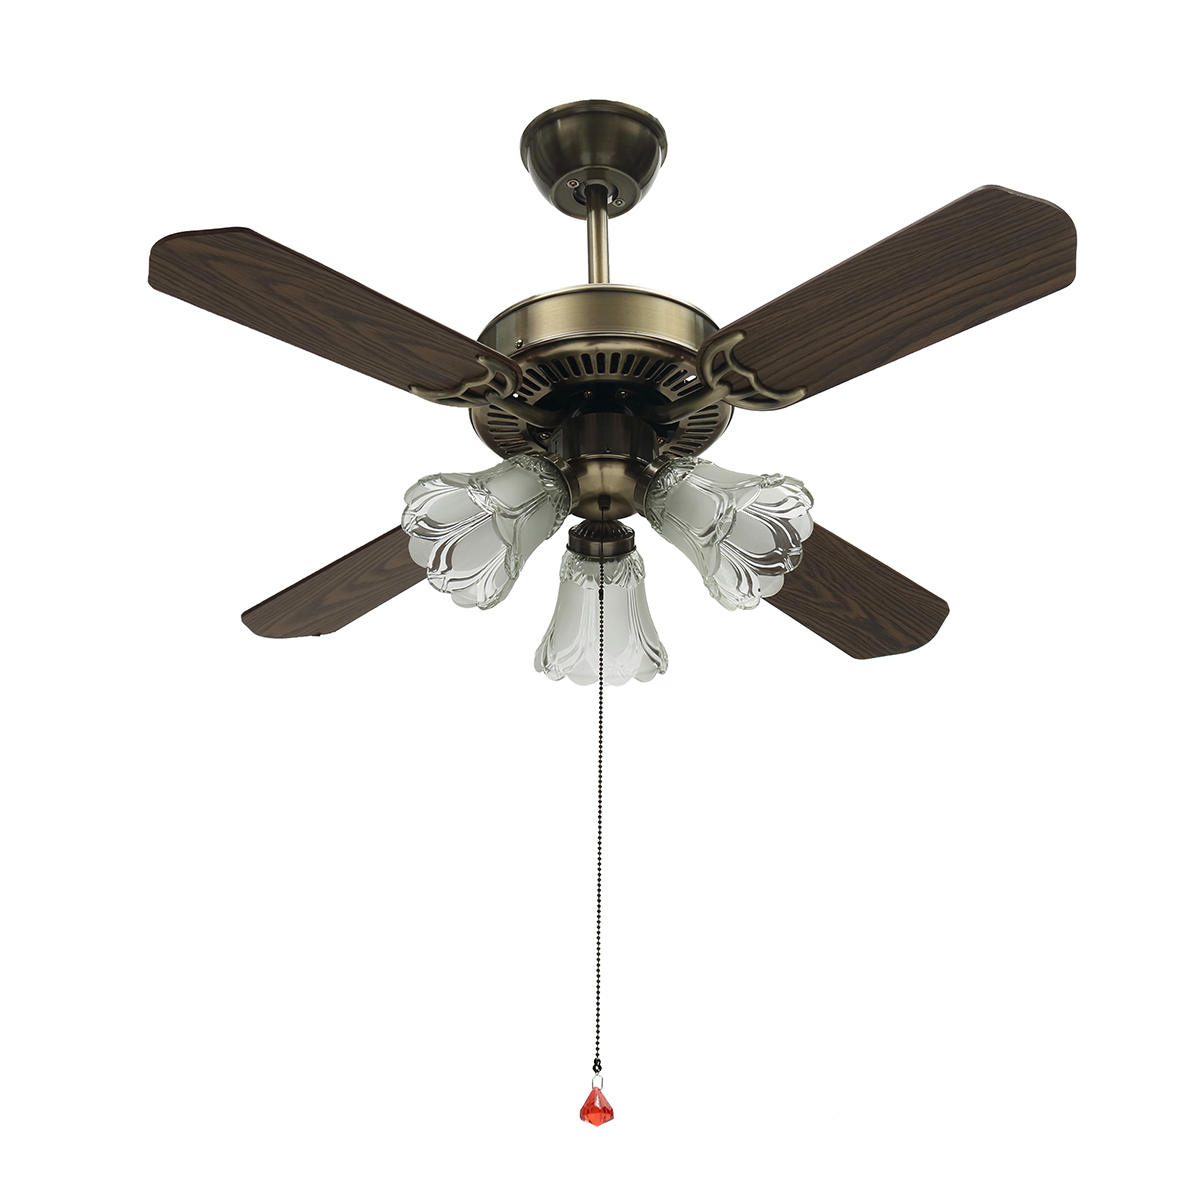 36inch Antique Ceiling Fan With 3 Lights Ac110 240v 4 Wooden Blades With Romote Control 3 Speeds